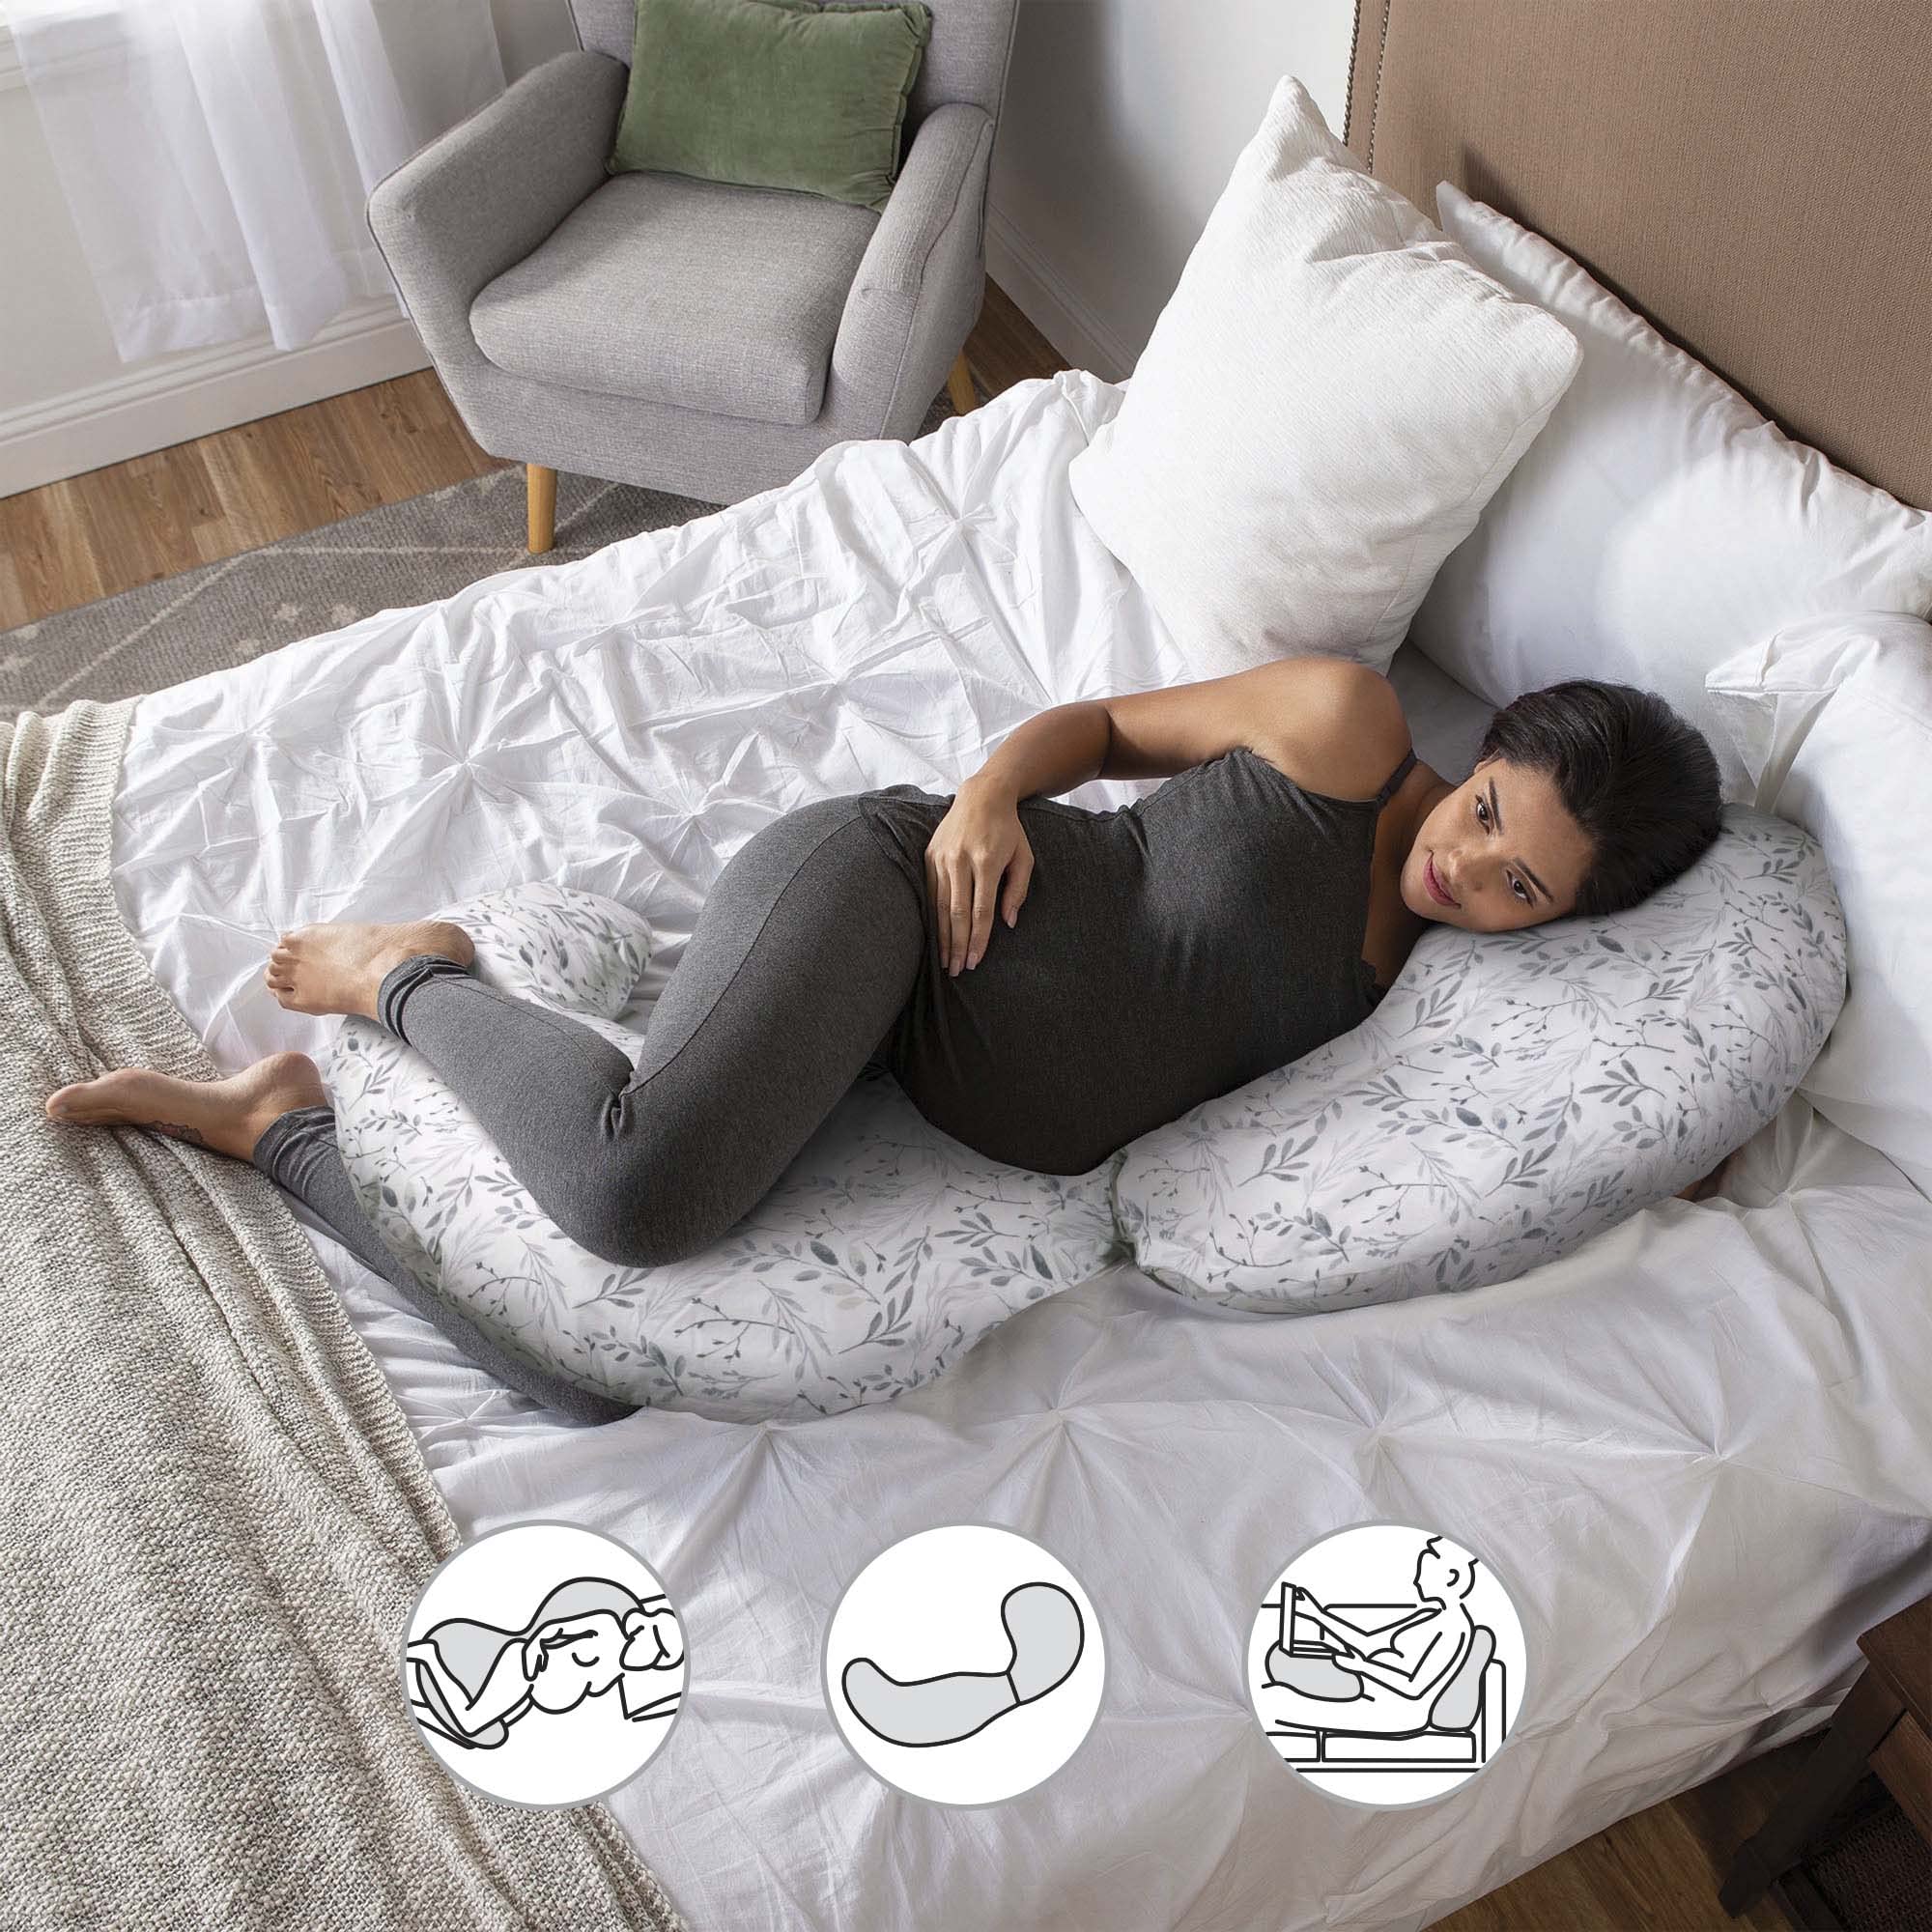 Boppy Total Body Pregnancy Pillow with Easy-on Removable Pillow Cover in Gray Scattered Leaves for Full-body Support, Body Pillow for Pregnancy and Postpartum Positioning